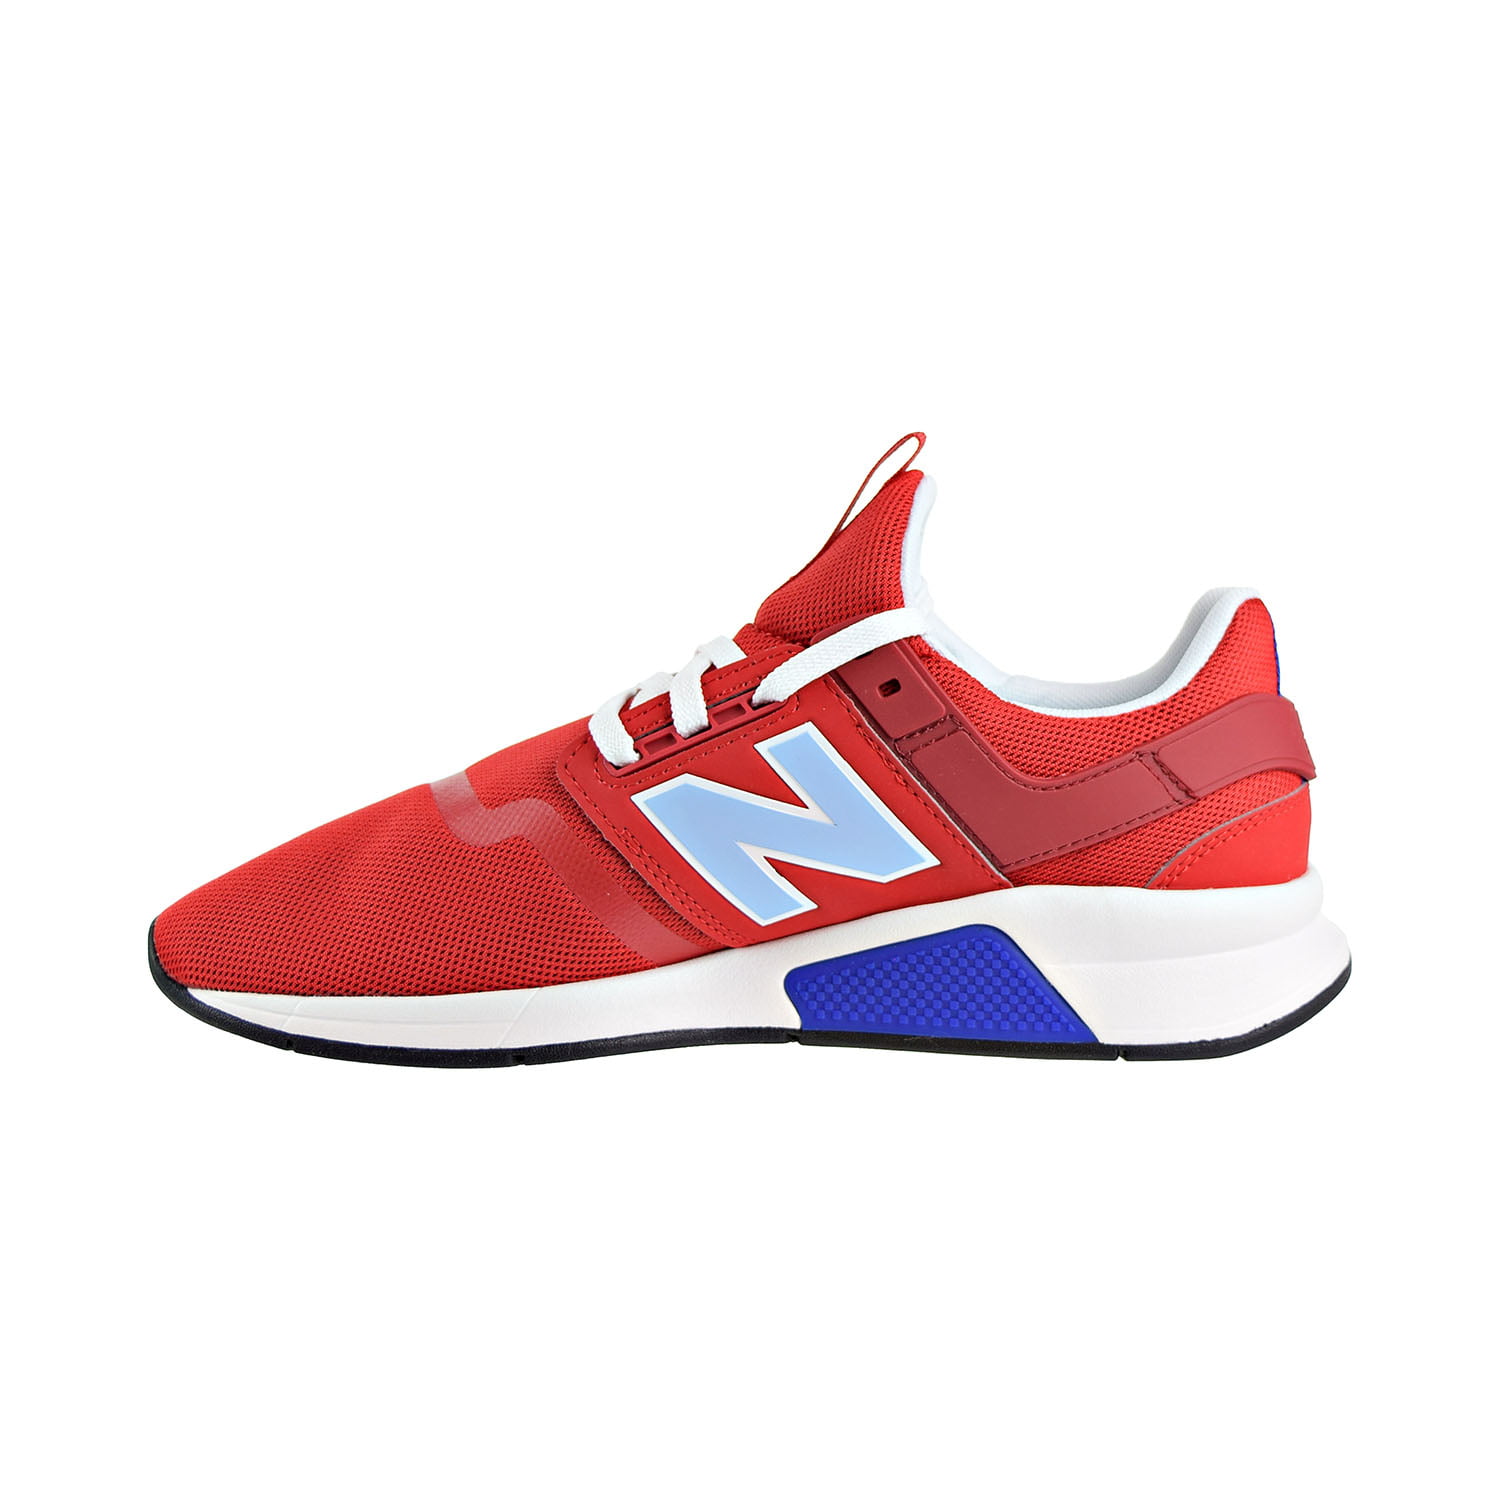 Surrey barco Proverbio New Balance Men's 247v2 Deconstructed Shoes Red with Blue - Walmart.com